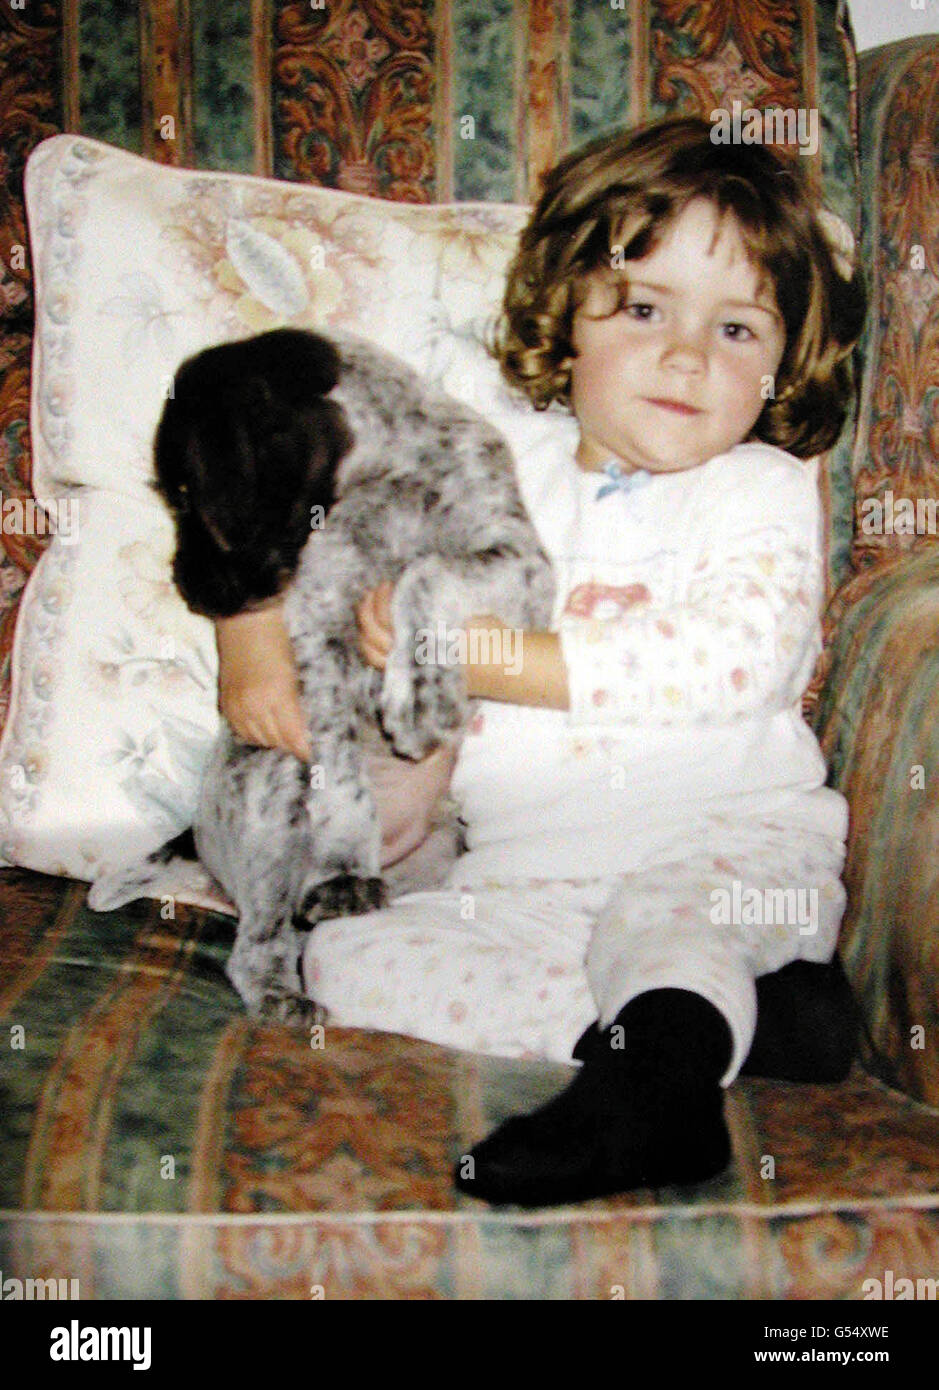 Undated collect picture of two-year-old Daniella Hurst, whose body, is thought to have been found in woodland at Norton Disney, in the Swinderby area, south of Lincoln in her father's silver Ford Fiesta car. * Detectives were continuing to question the 33-year-old man about the death of a Daniella who had been missing. Stock Photo